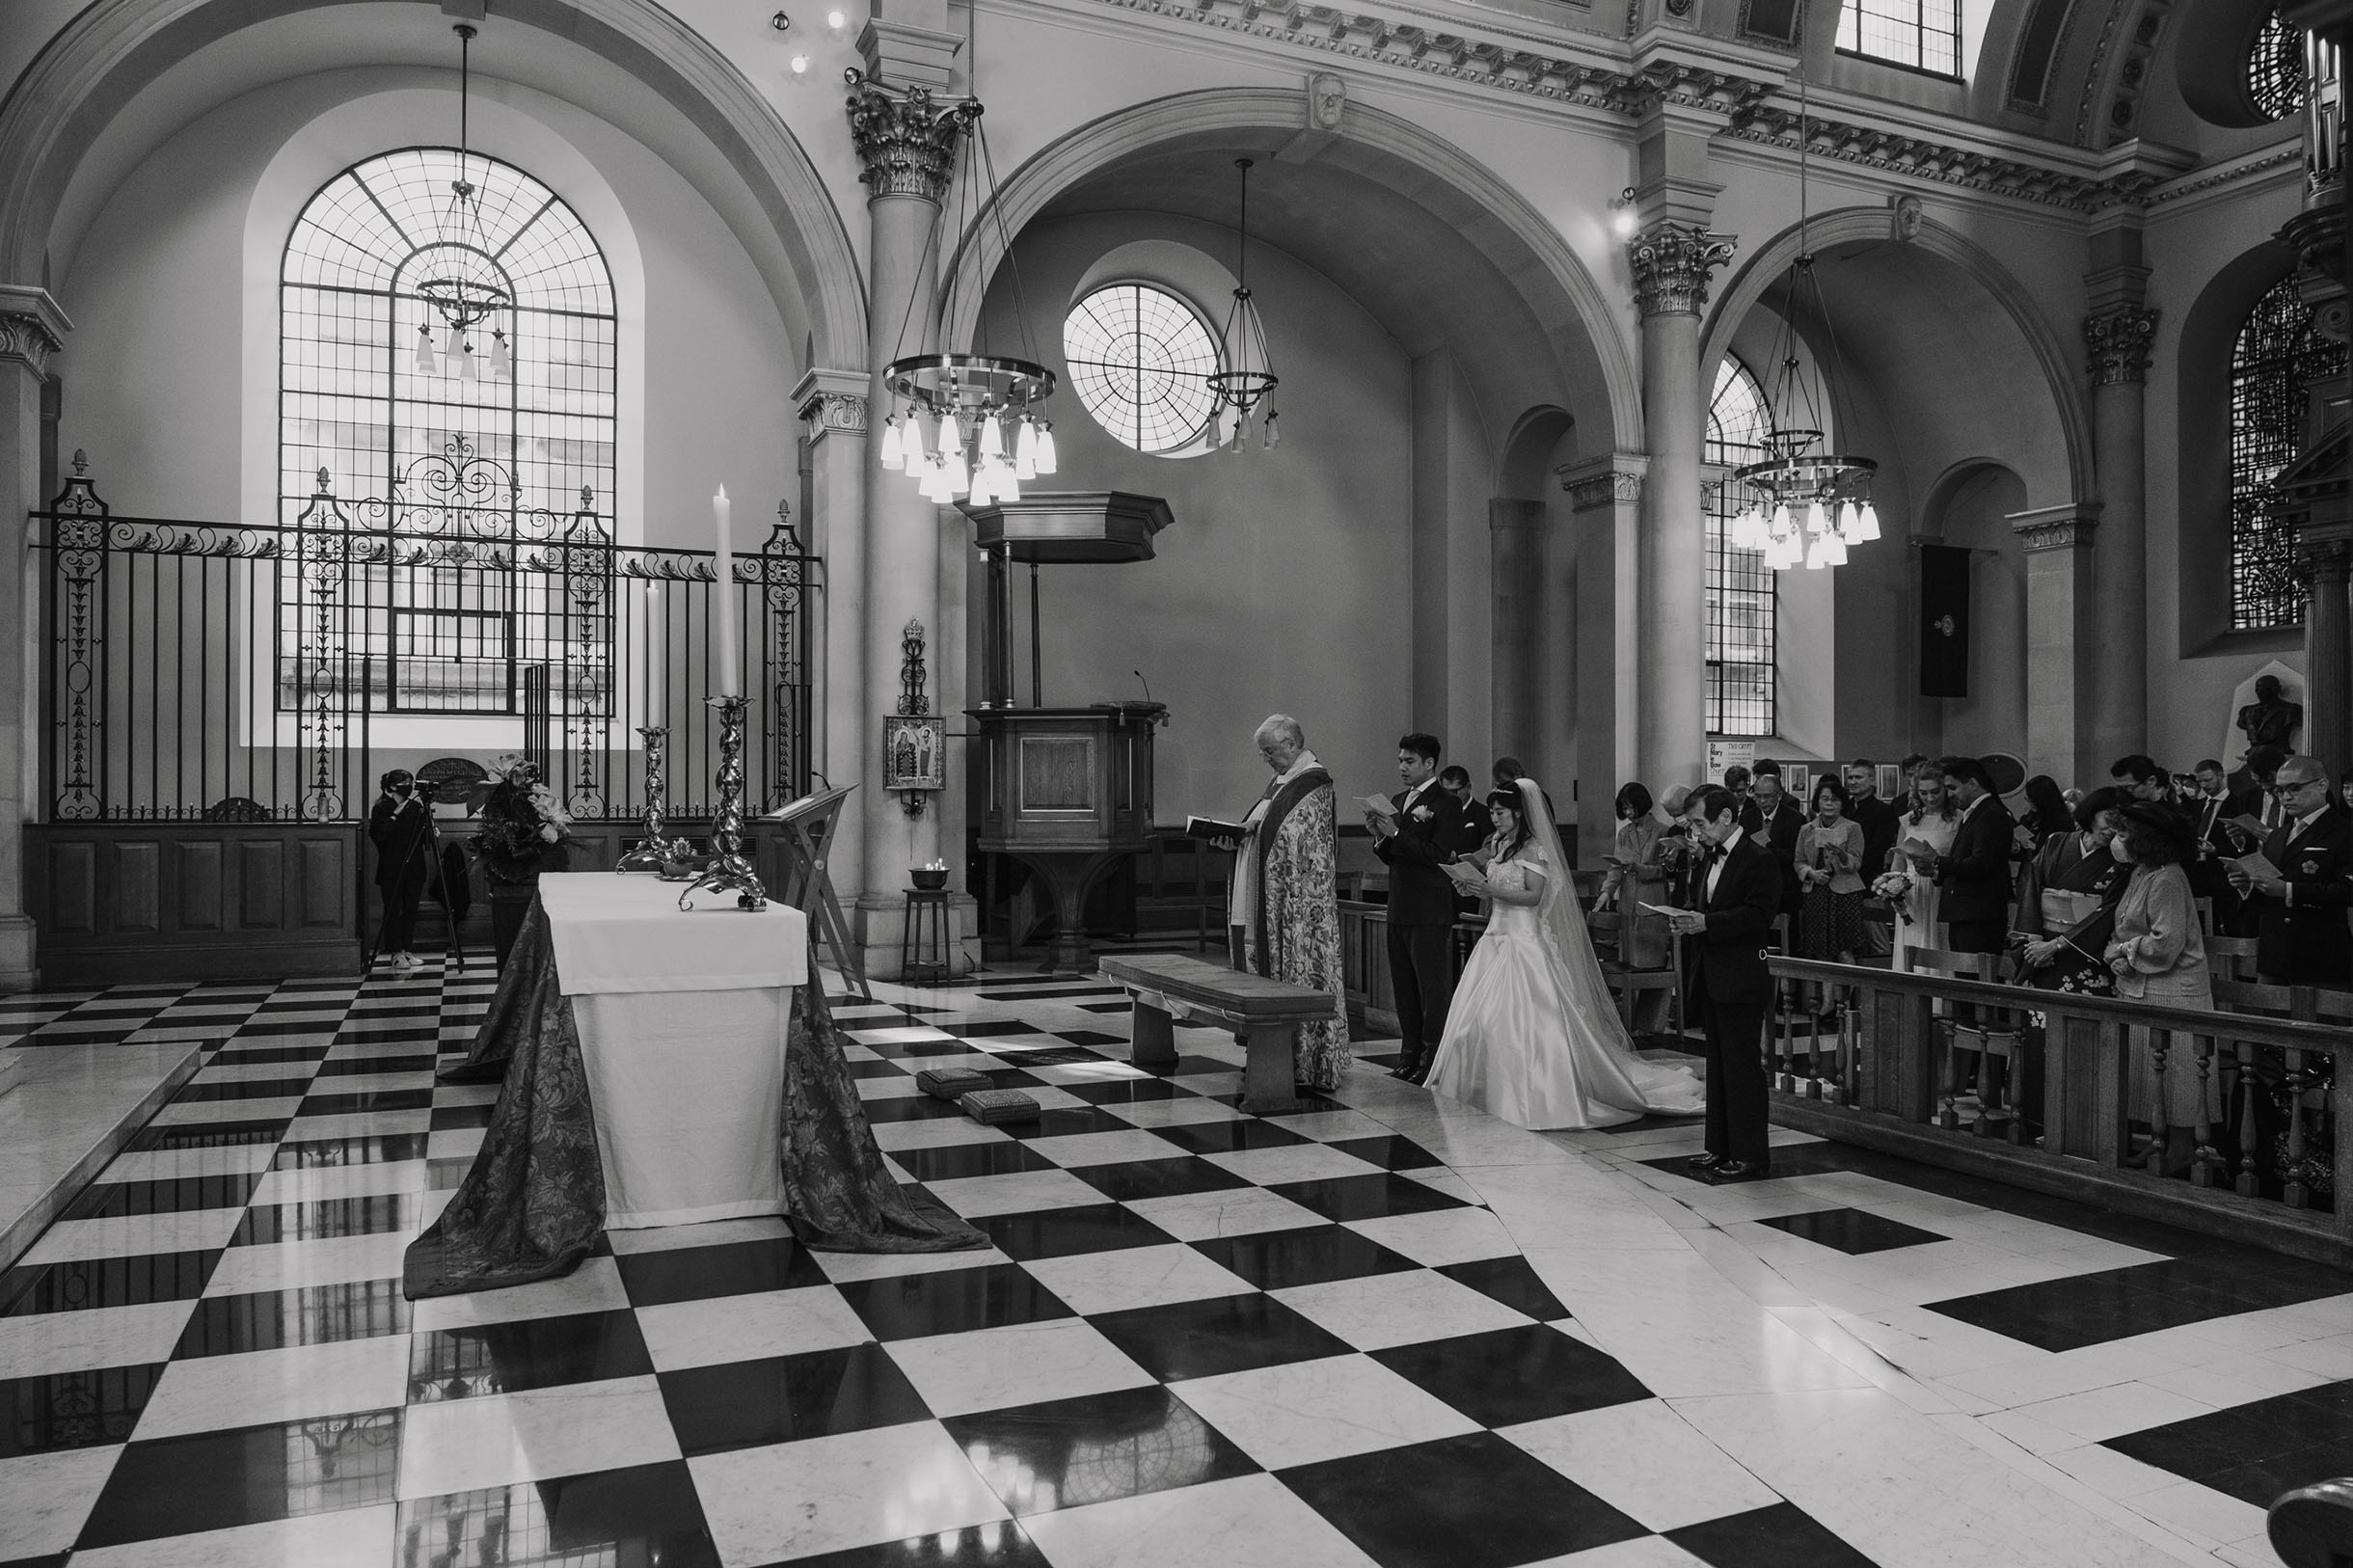 Inside a church in London, checkered floor, marrying couple with the priest, black and white wedding photography.